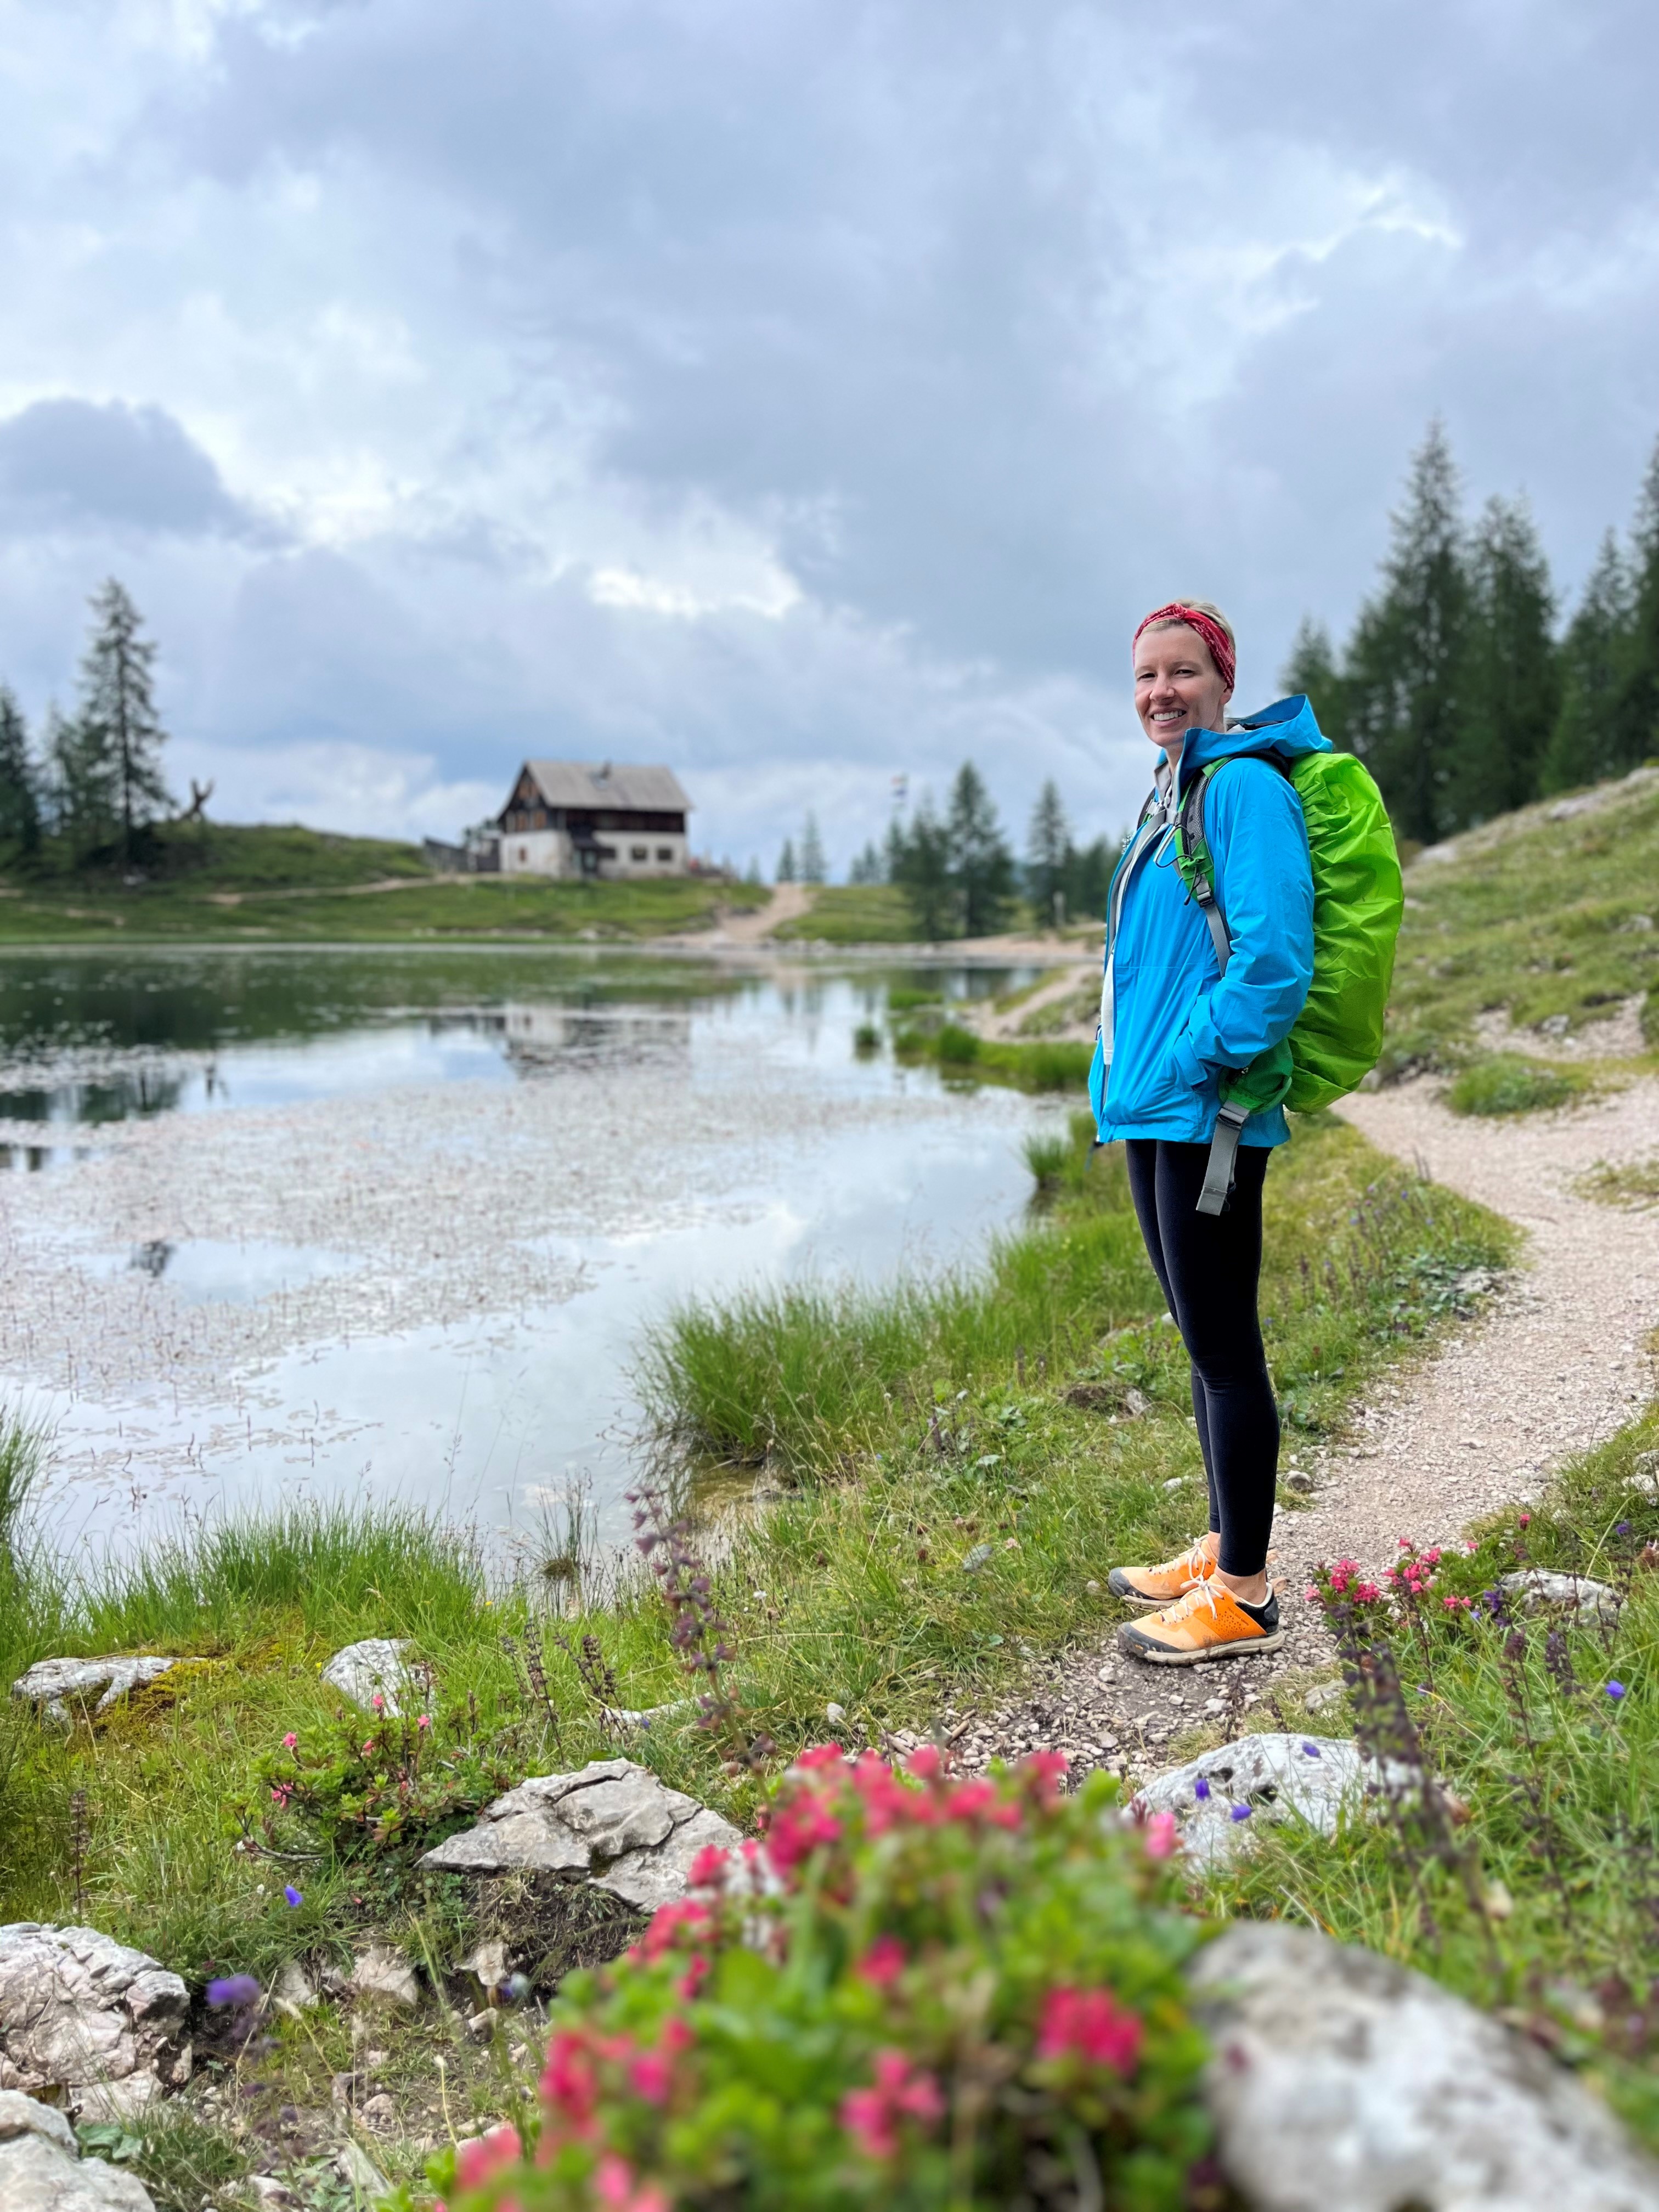 photo of gretchen standing on a hiking trail with a small waterway in the background. wildflowers frame the trail in the foreground.